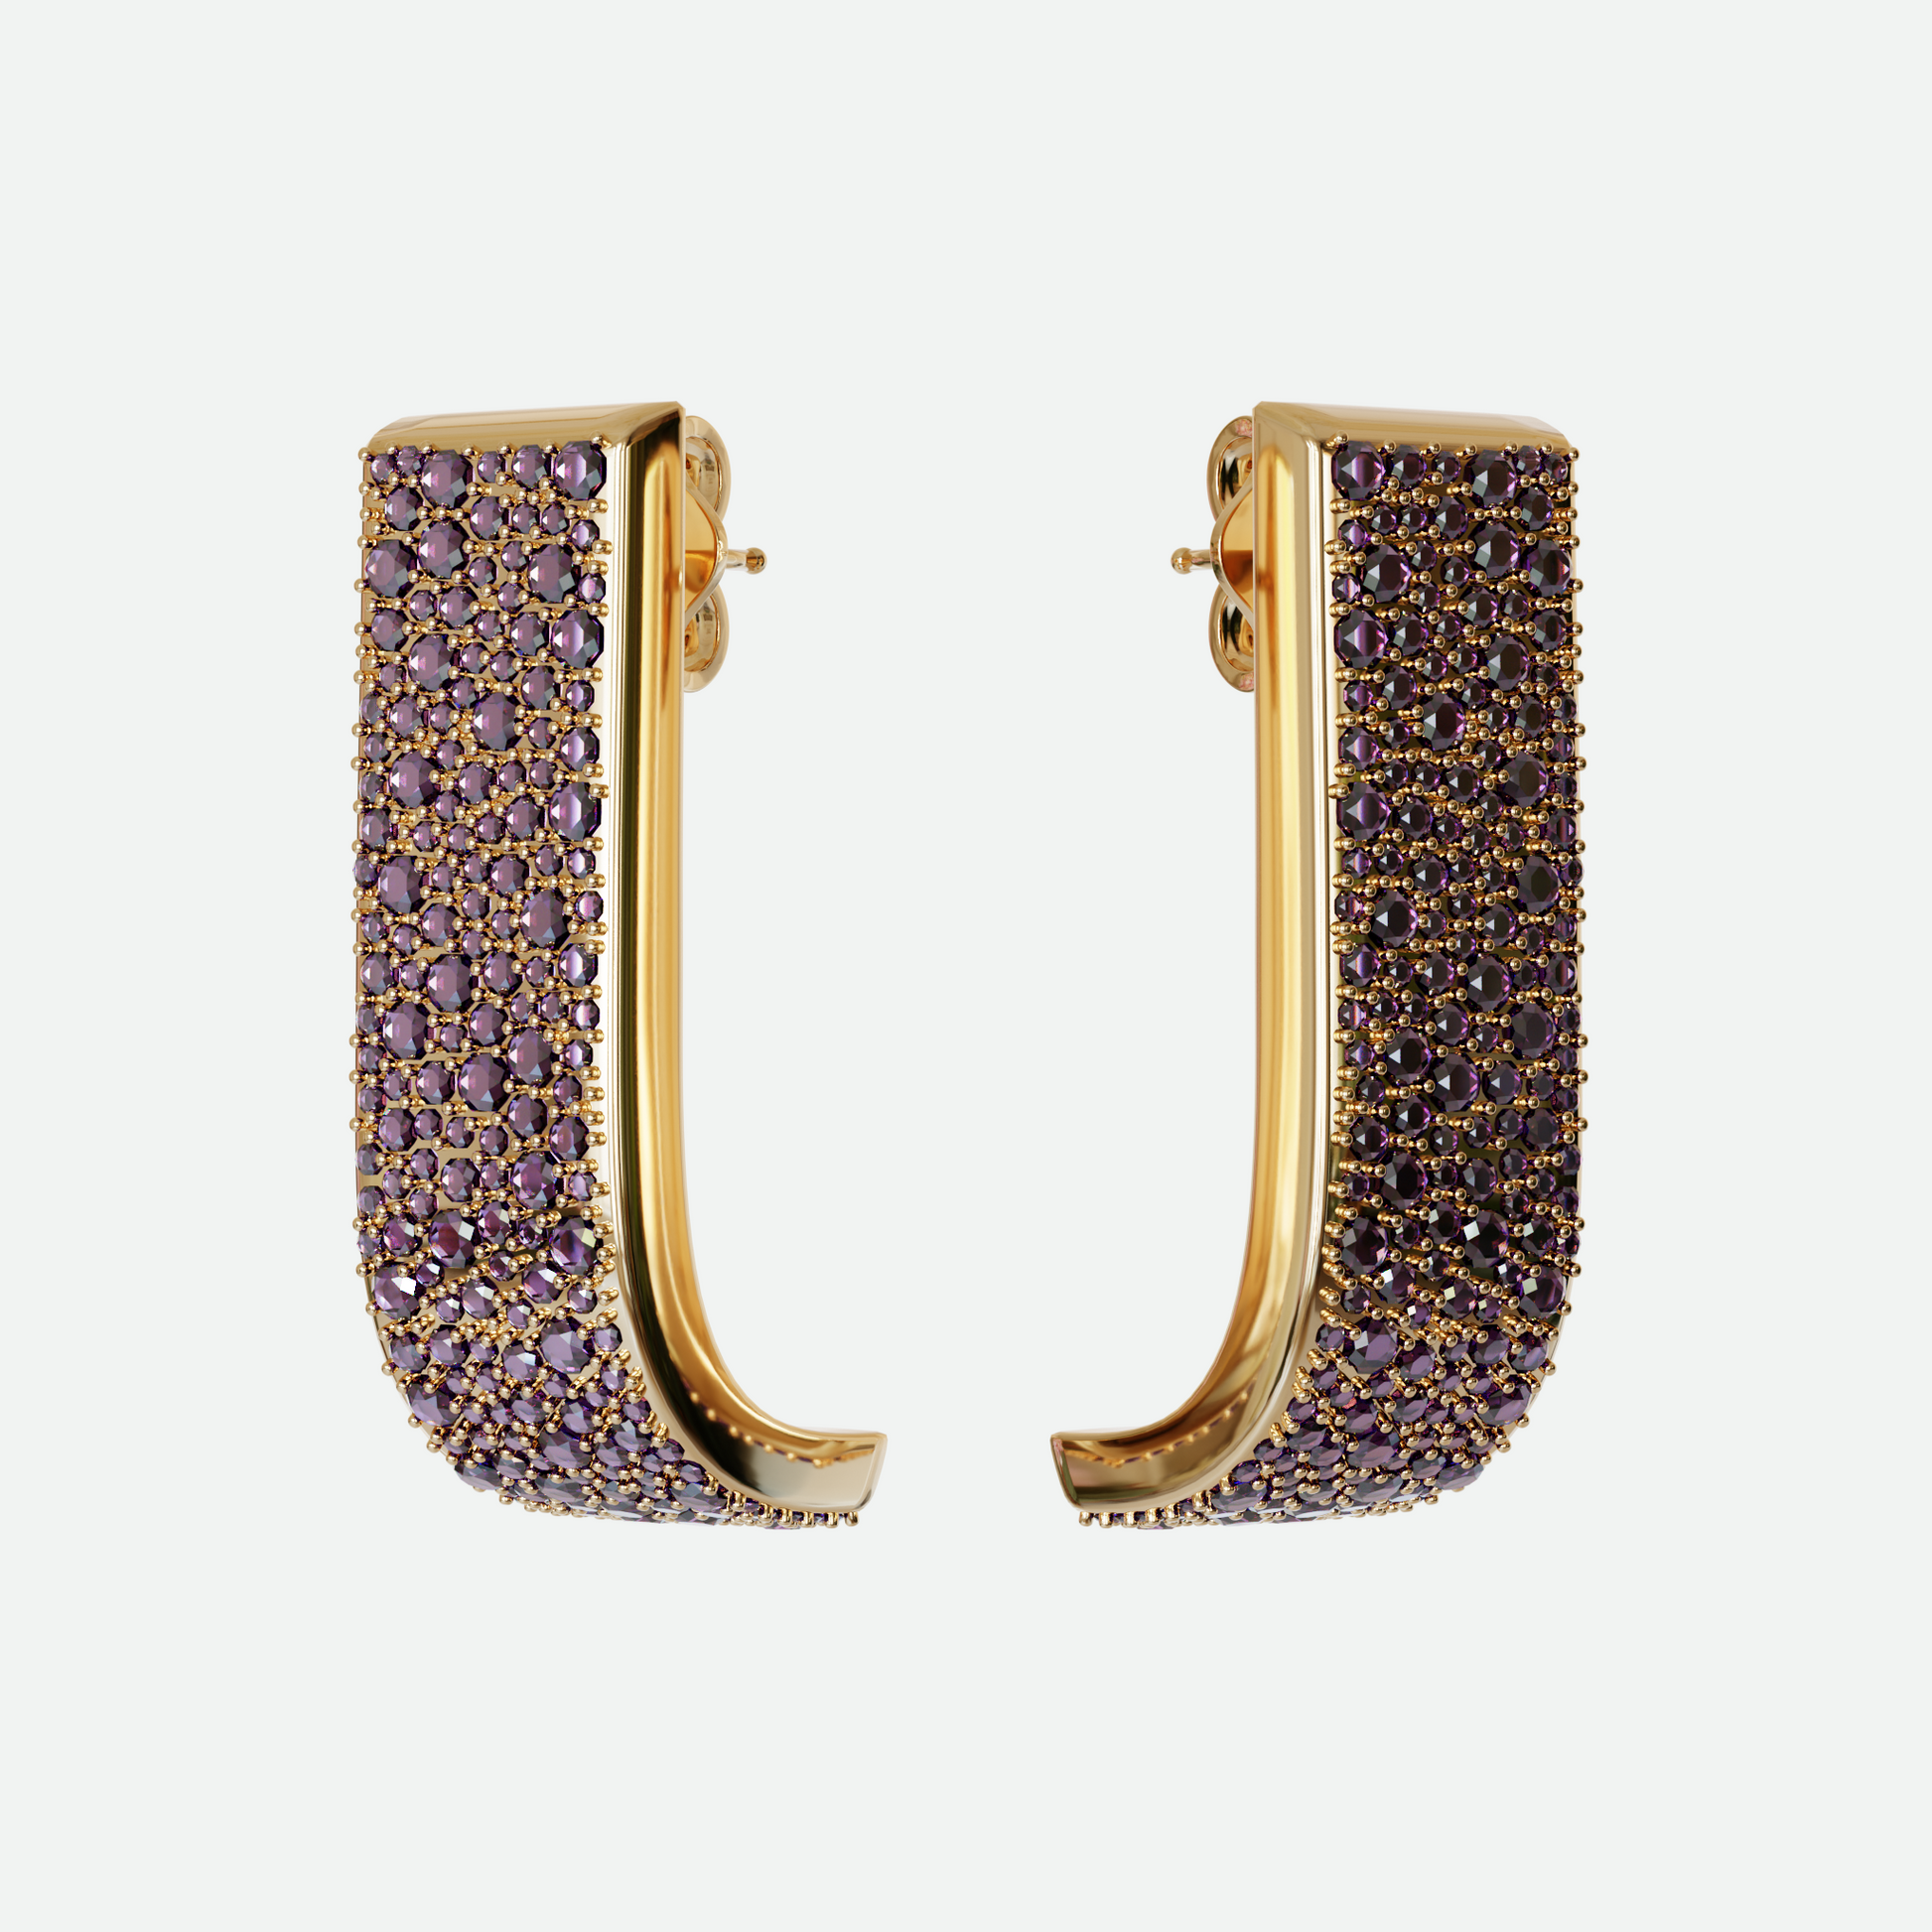 Lucci earrings with amethyst cubic zirconia crystals on a gold plated curving bar, designed by Ruggeri.